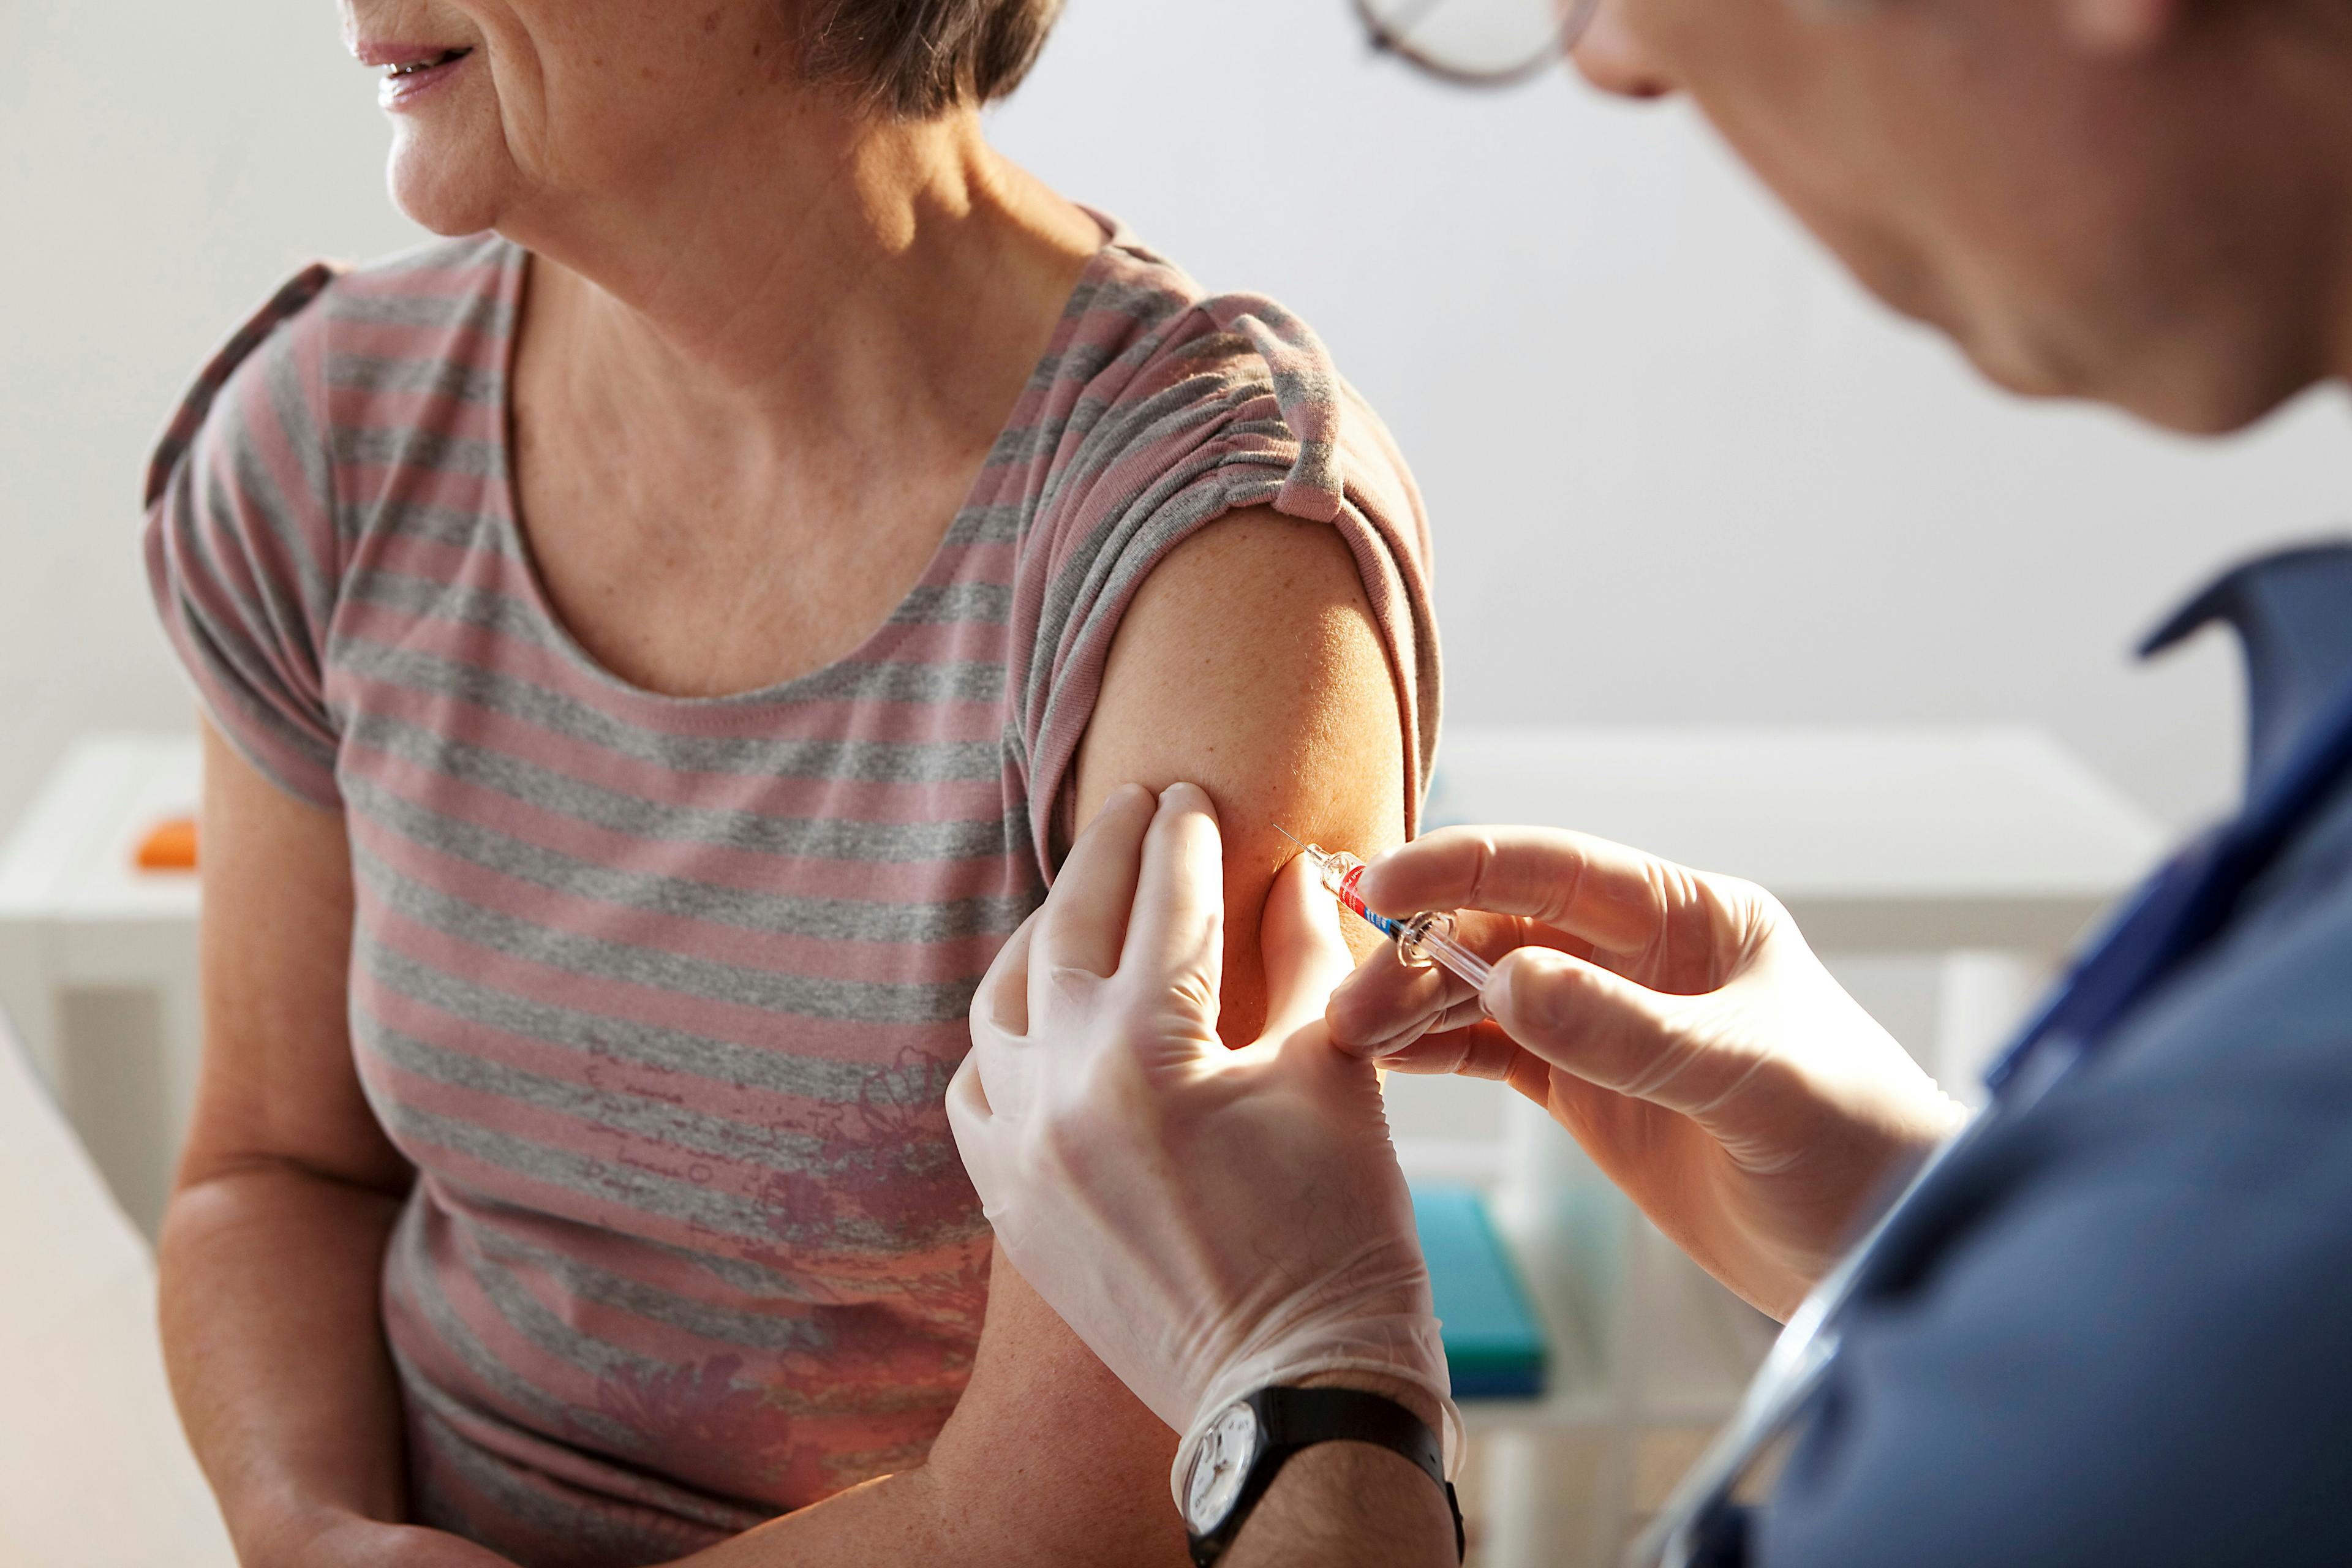 COVID-19 Vaccination Not Associated with Increased Postmenopausal Bleeding